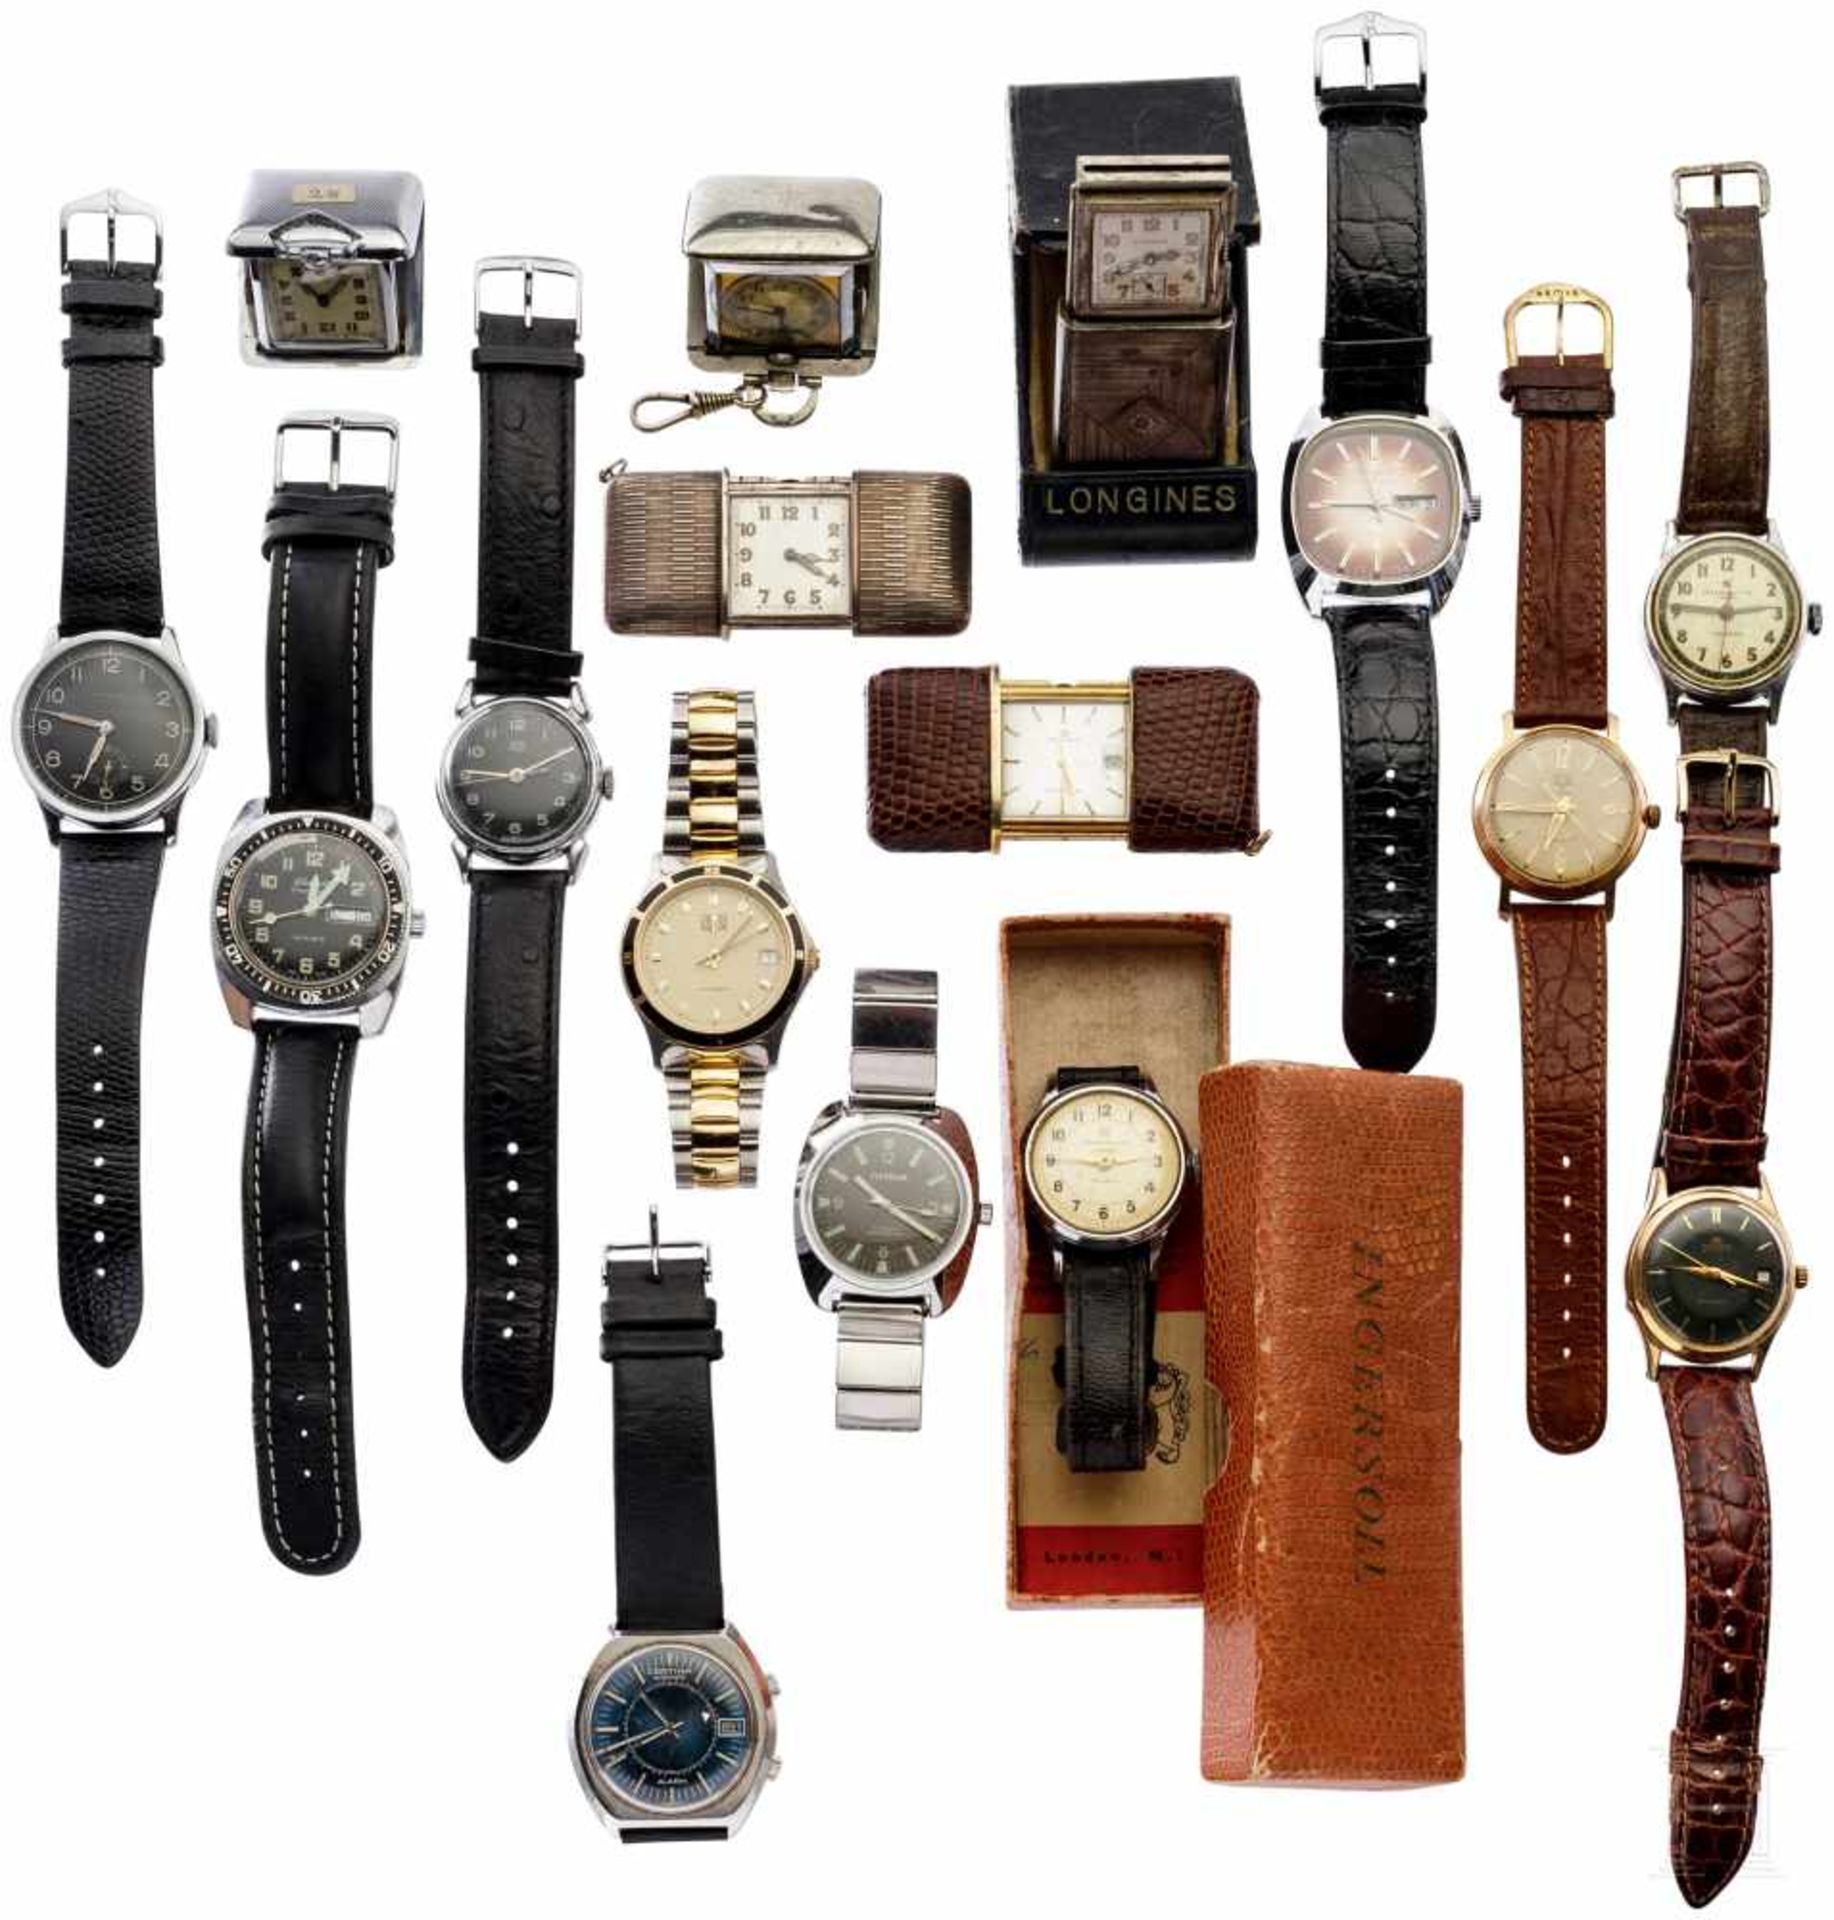 A small collection of watches20 wristwatches, mechanical or quartz, among them Ingersoll Triumph,